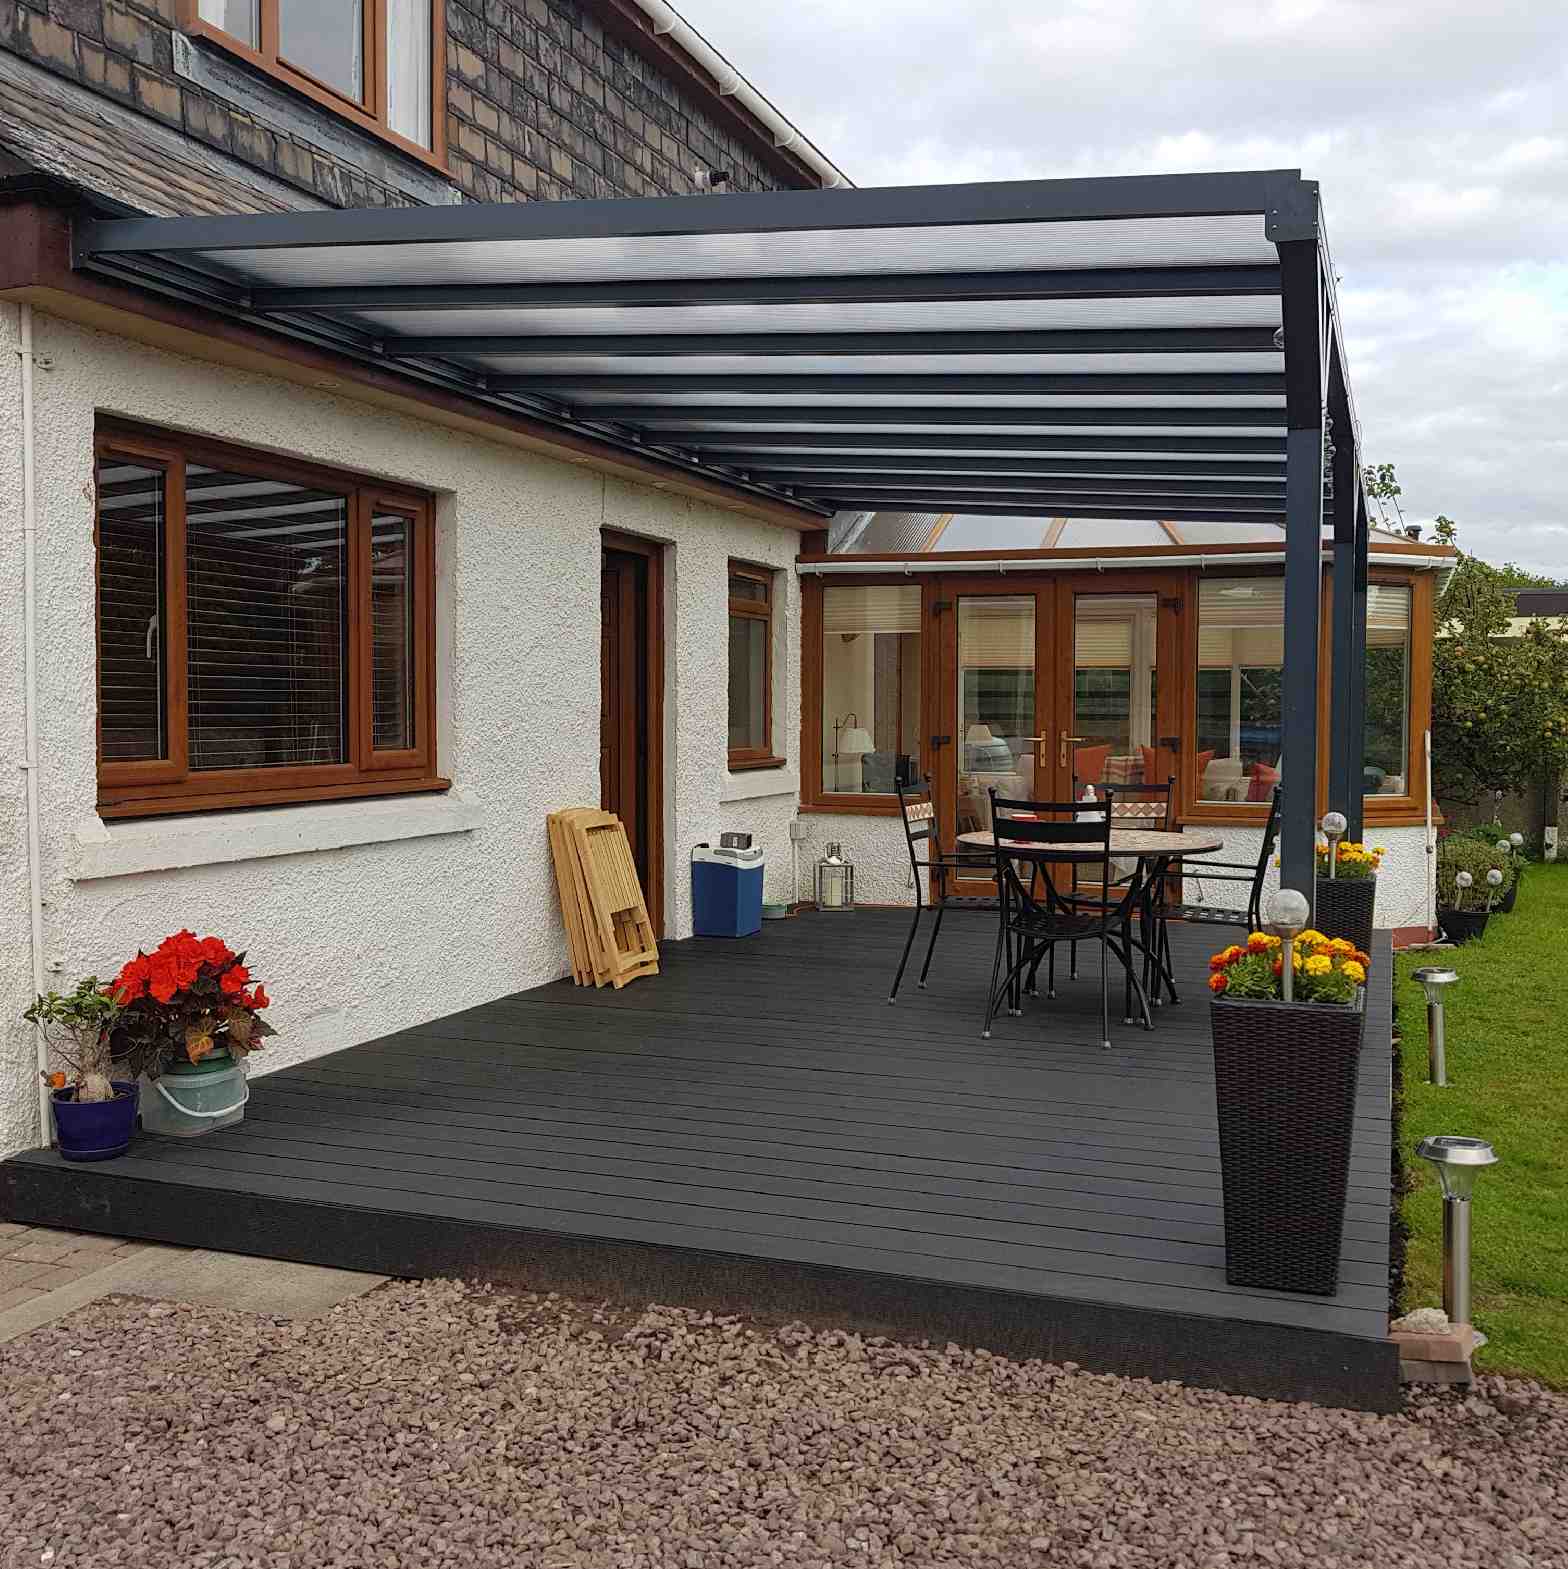 Buy Omega Verandah, Anthracite Grey, 16mm Polycarbonate Glazing - 9.9m (W) x 4.0m (P), (5) Supporting Posts online today